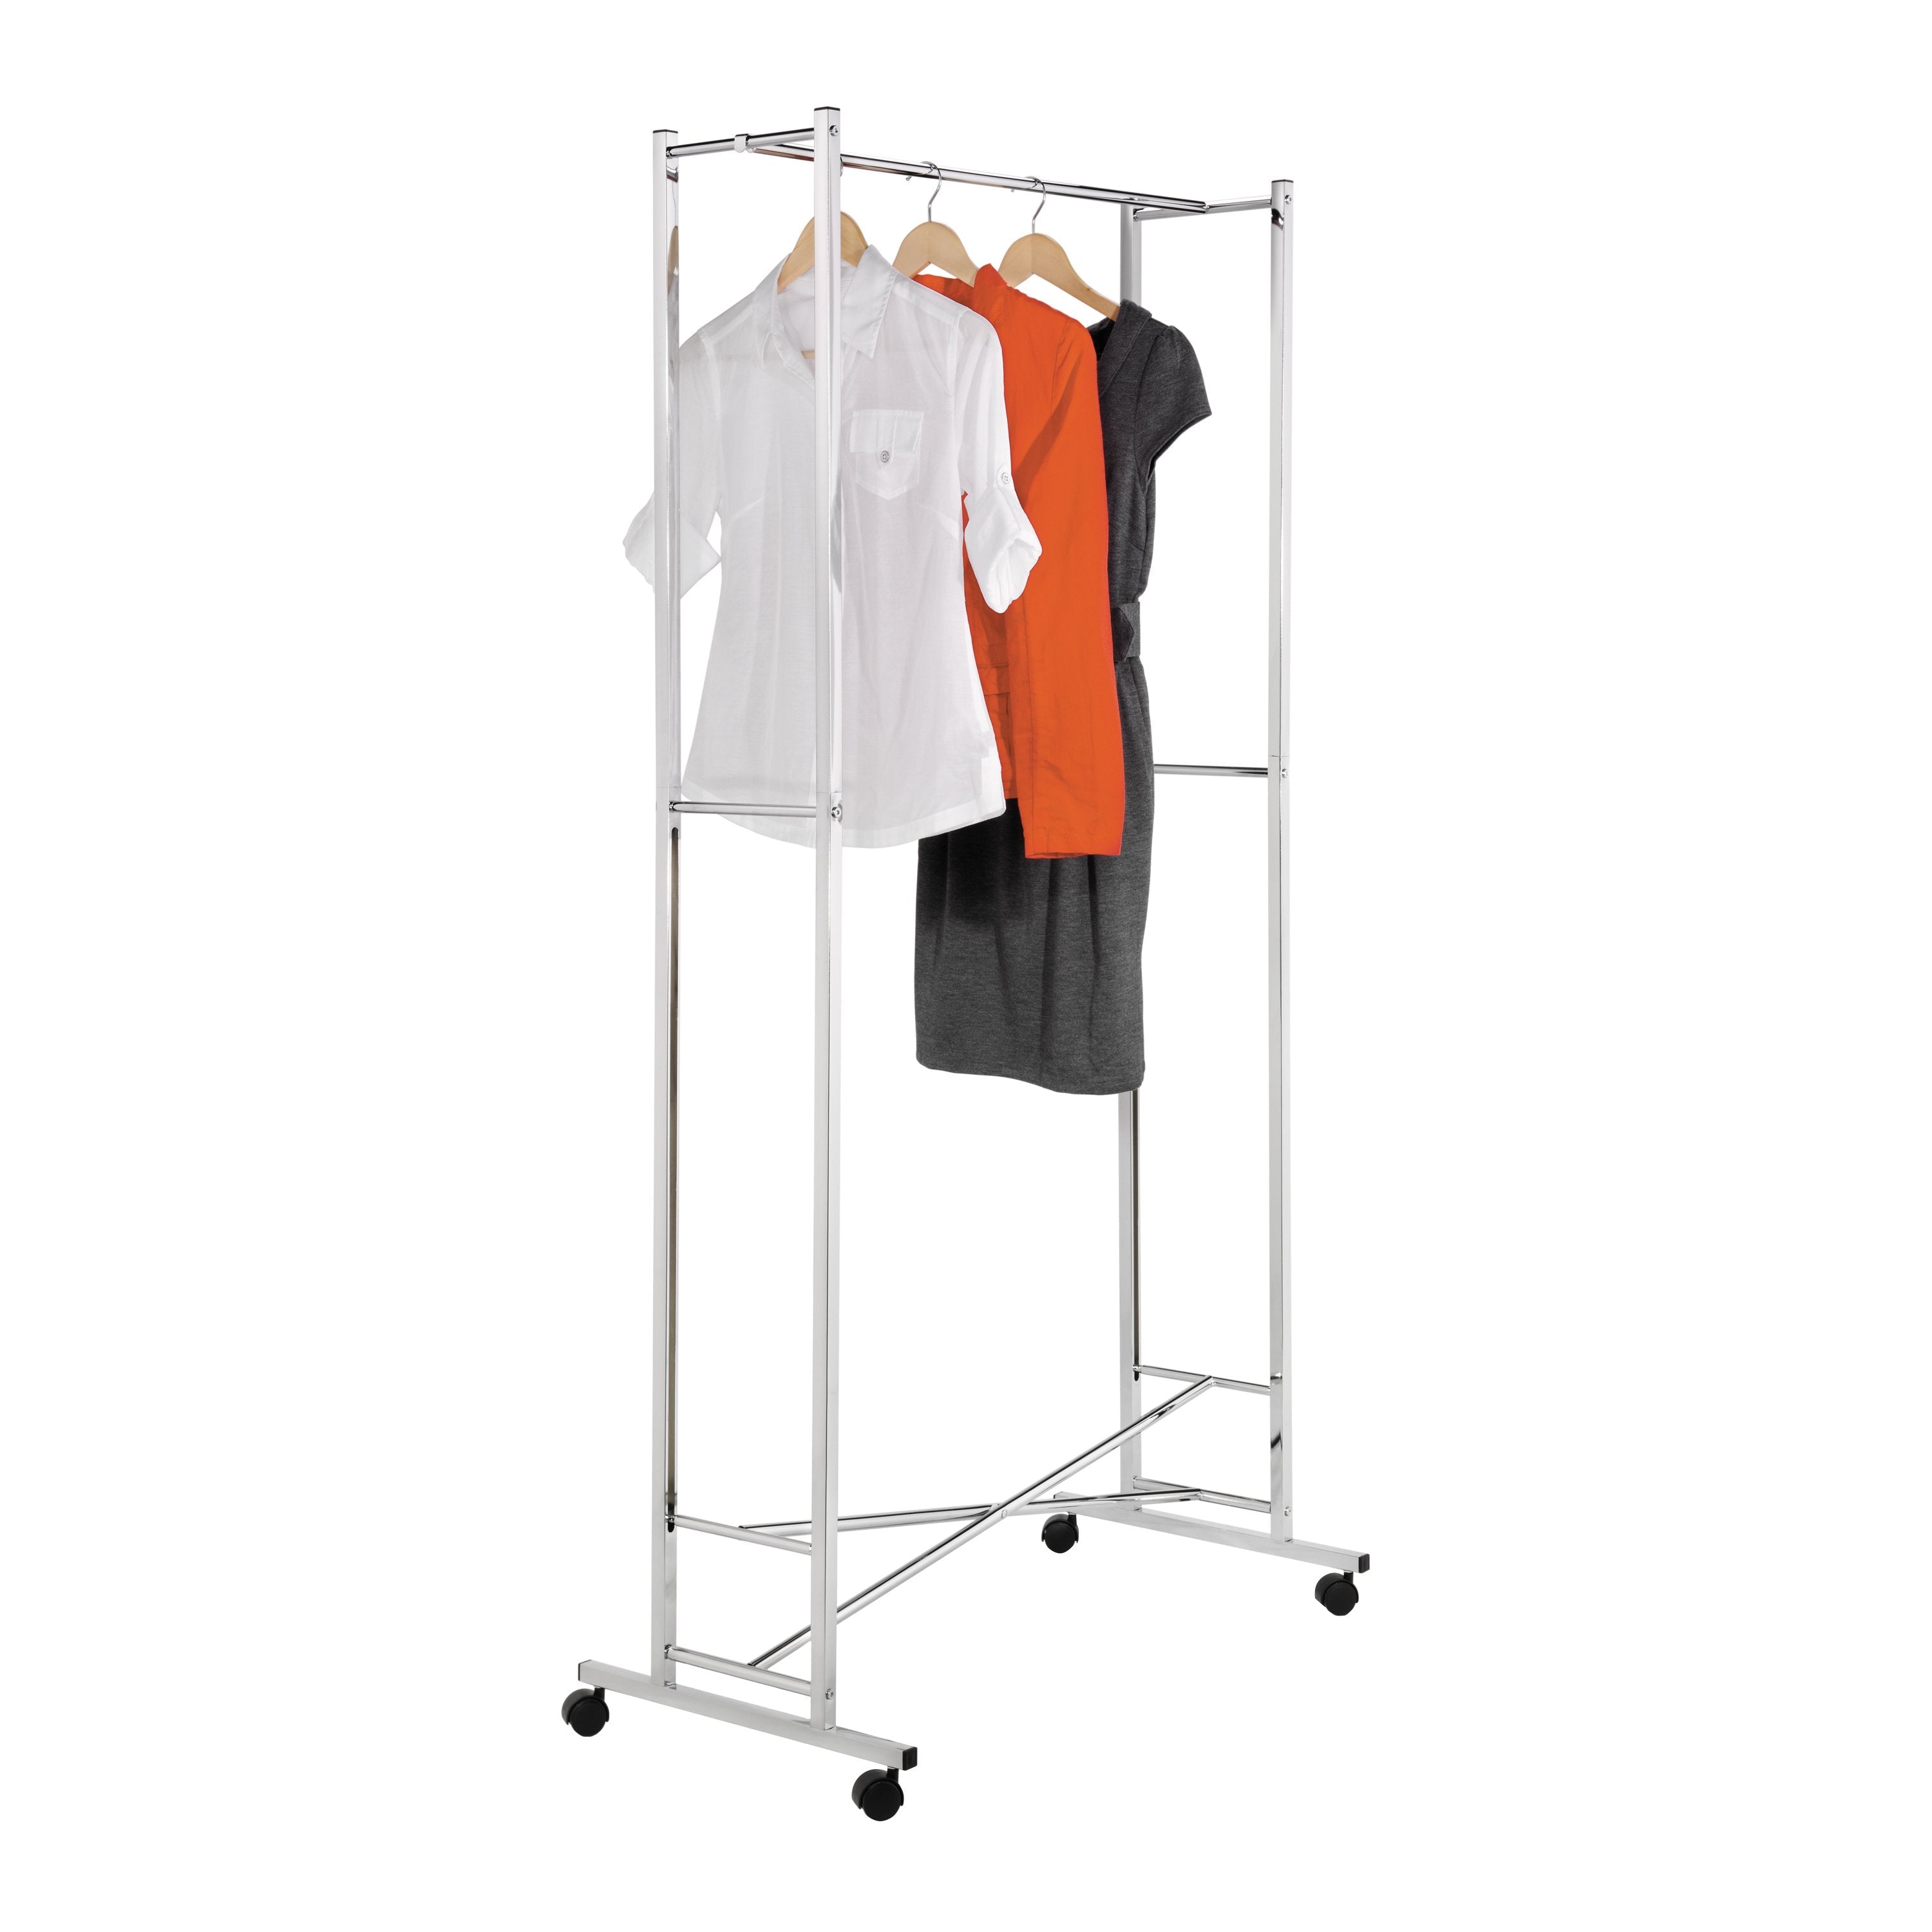 Double clothes hanger with swivel wheels with shelves and side